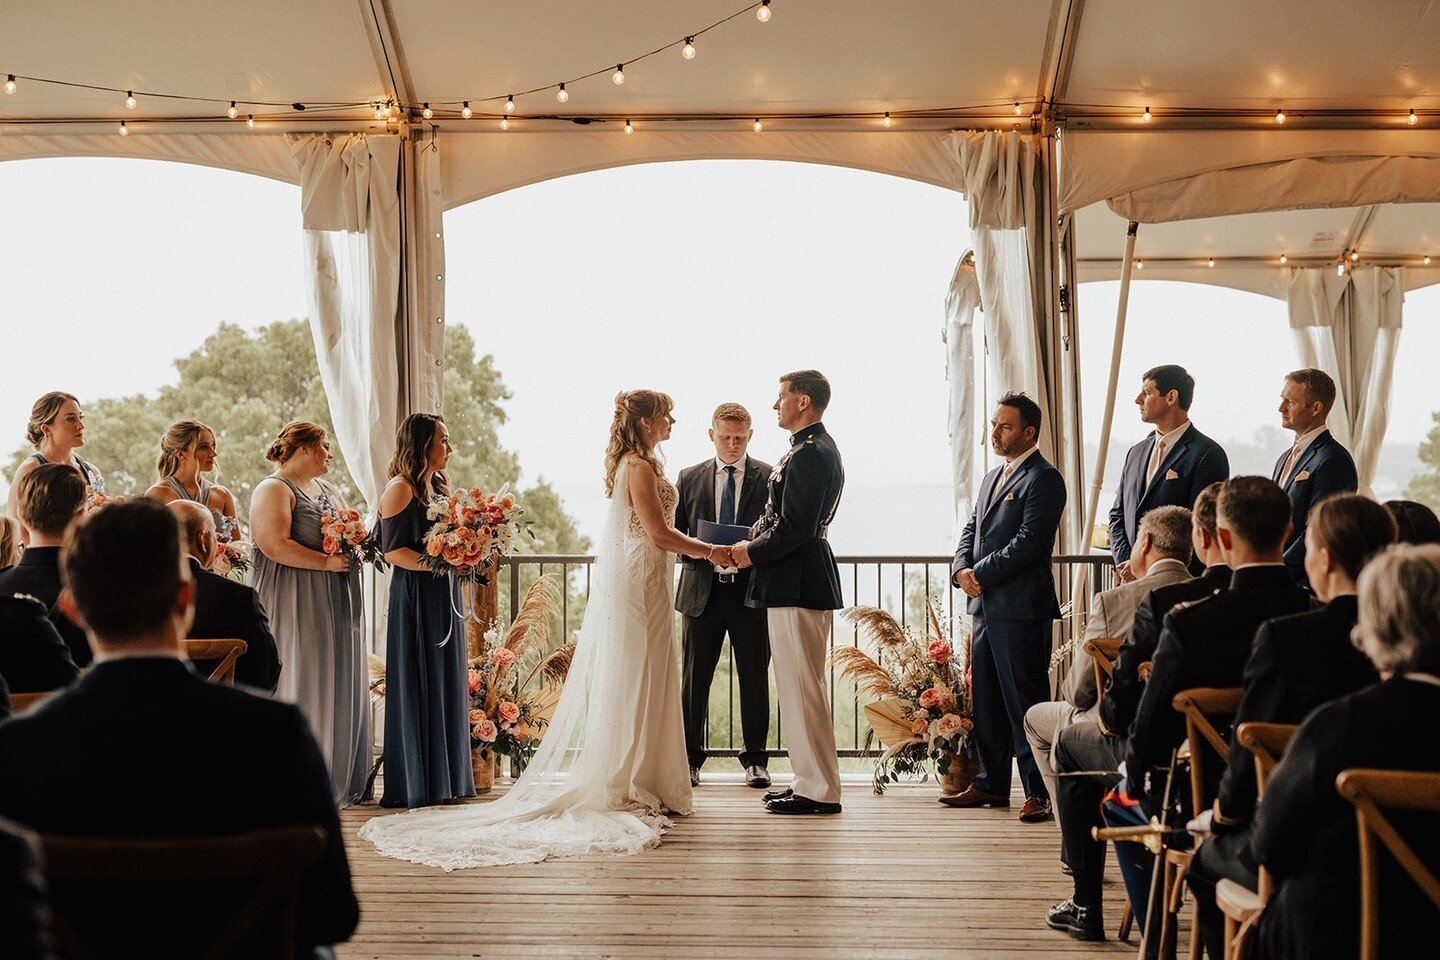 On these gloomy days we're reminiscing over some of our favorite rainy ceremonies.